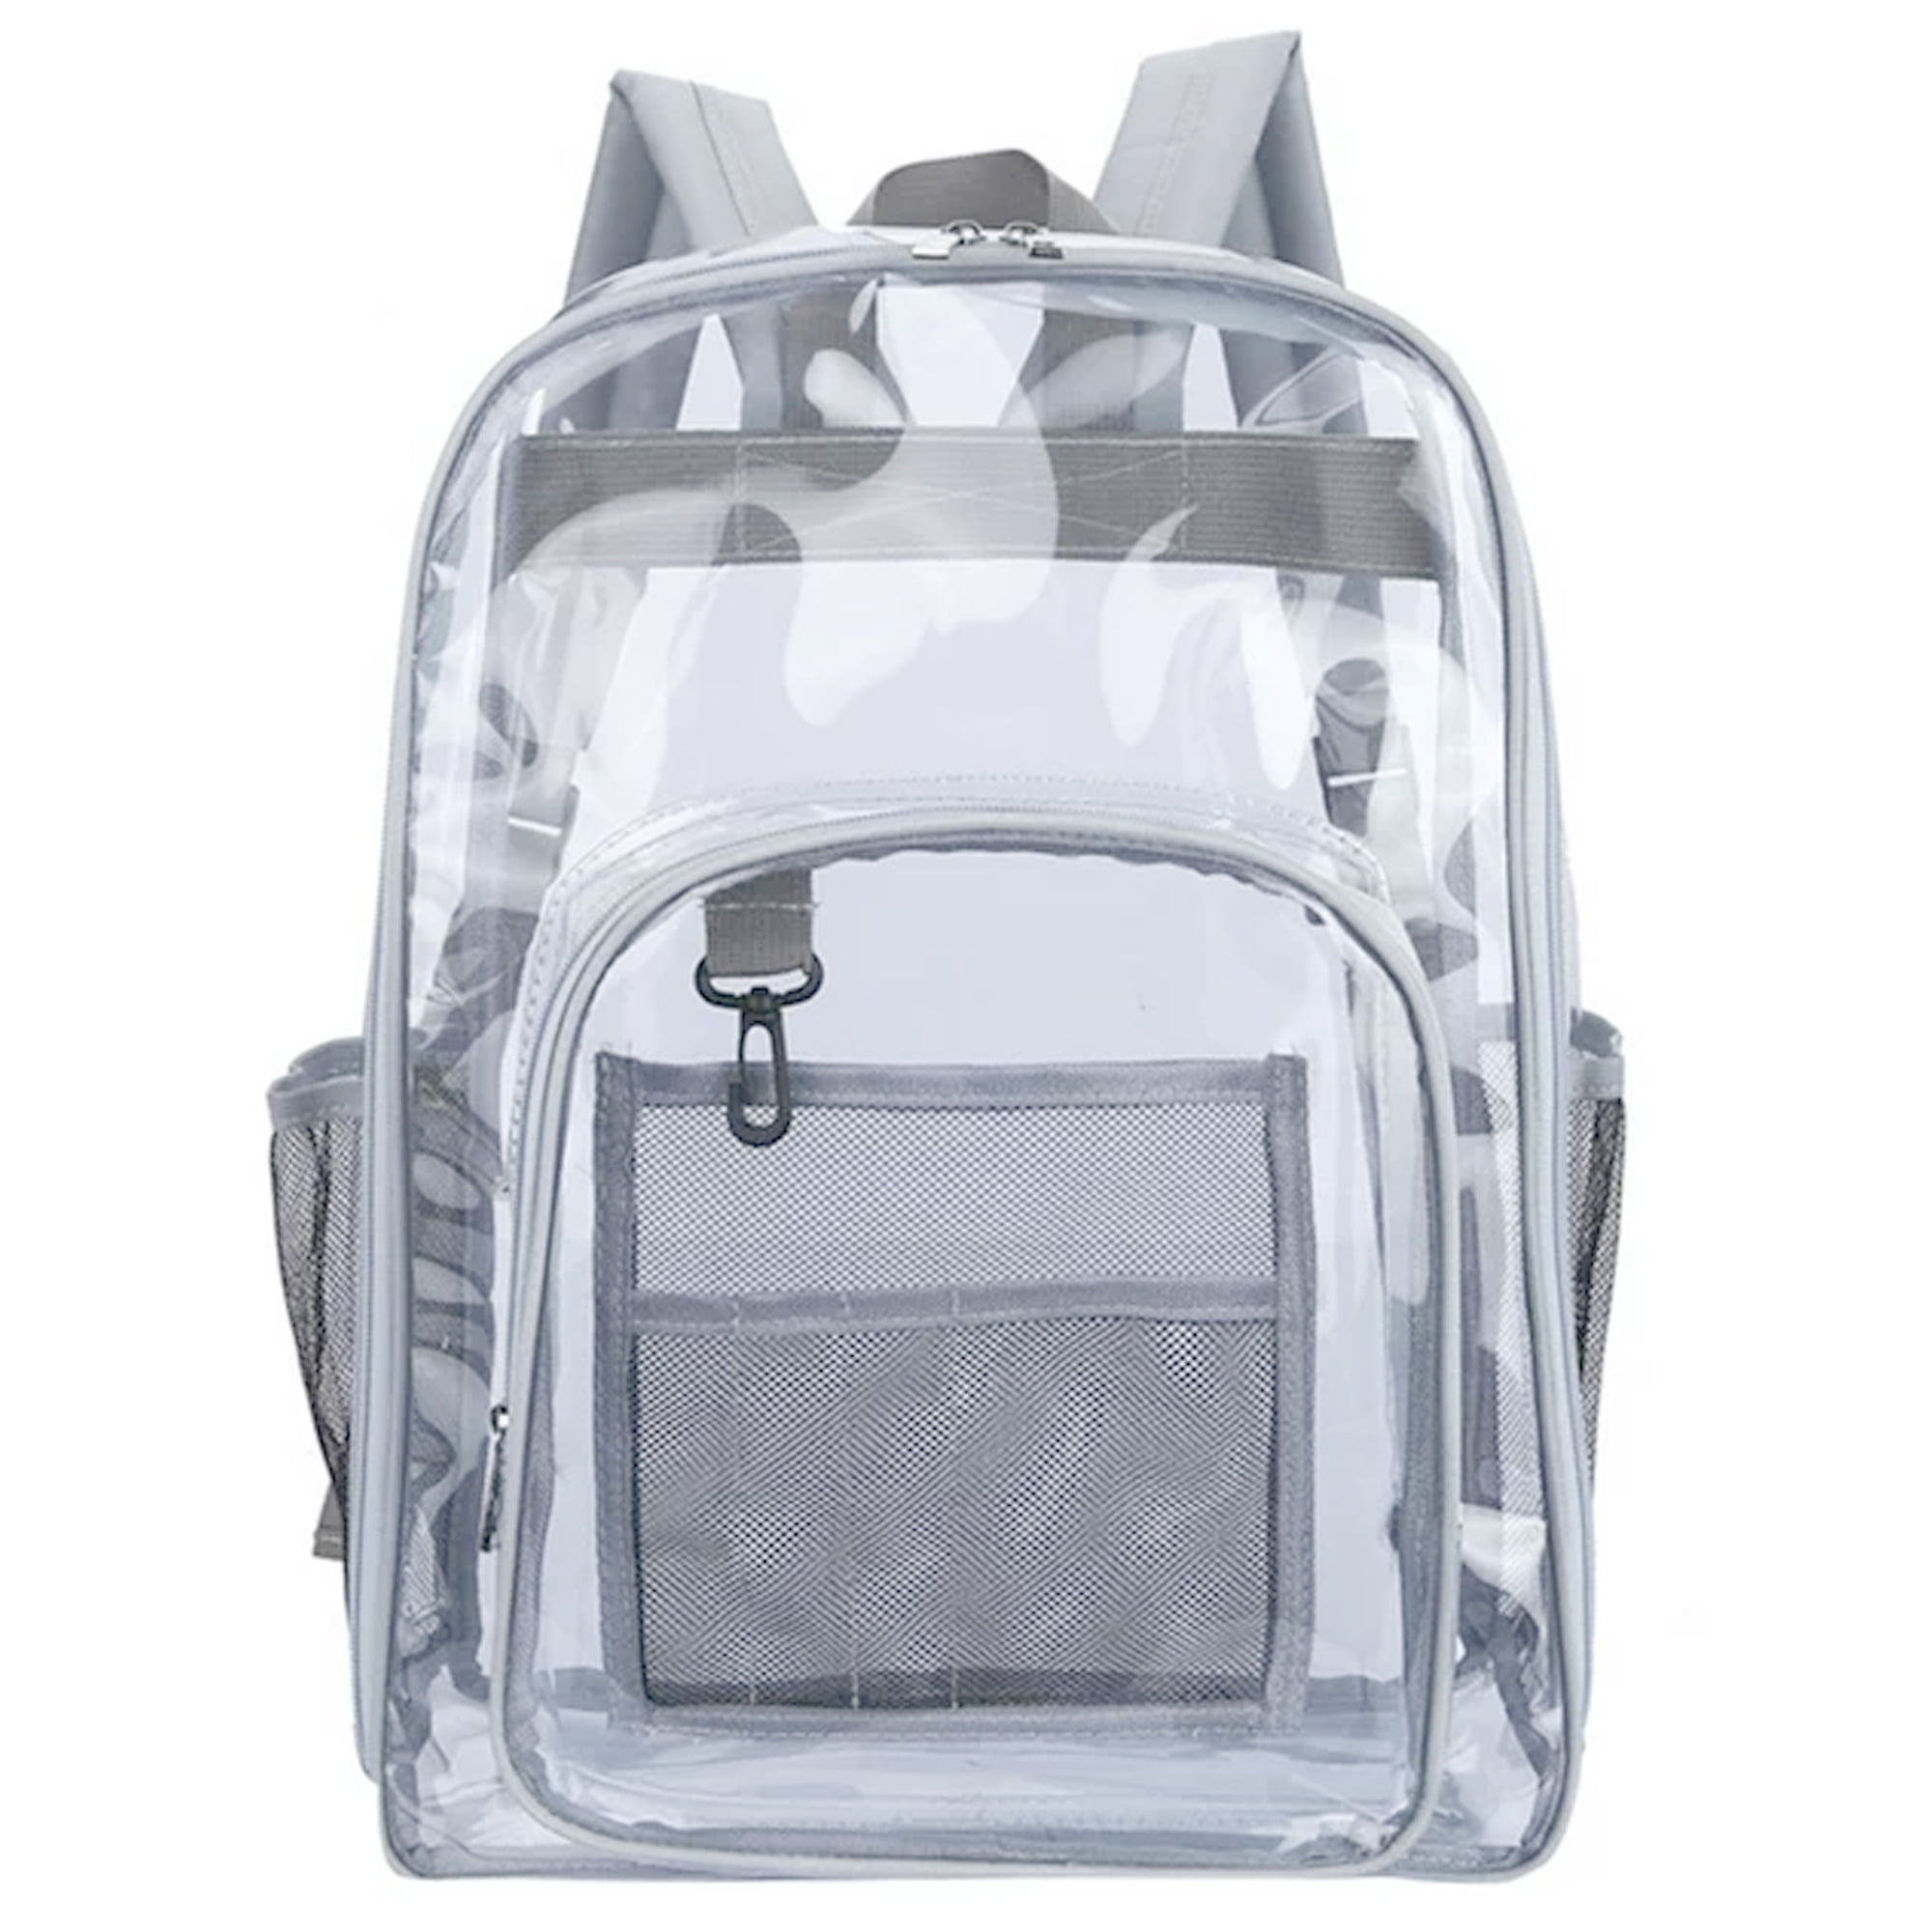 SUGARDAY Clear Backpack Heavy Duty Clear Bookbag for Adults School ...